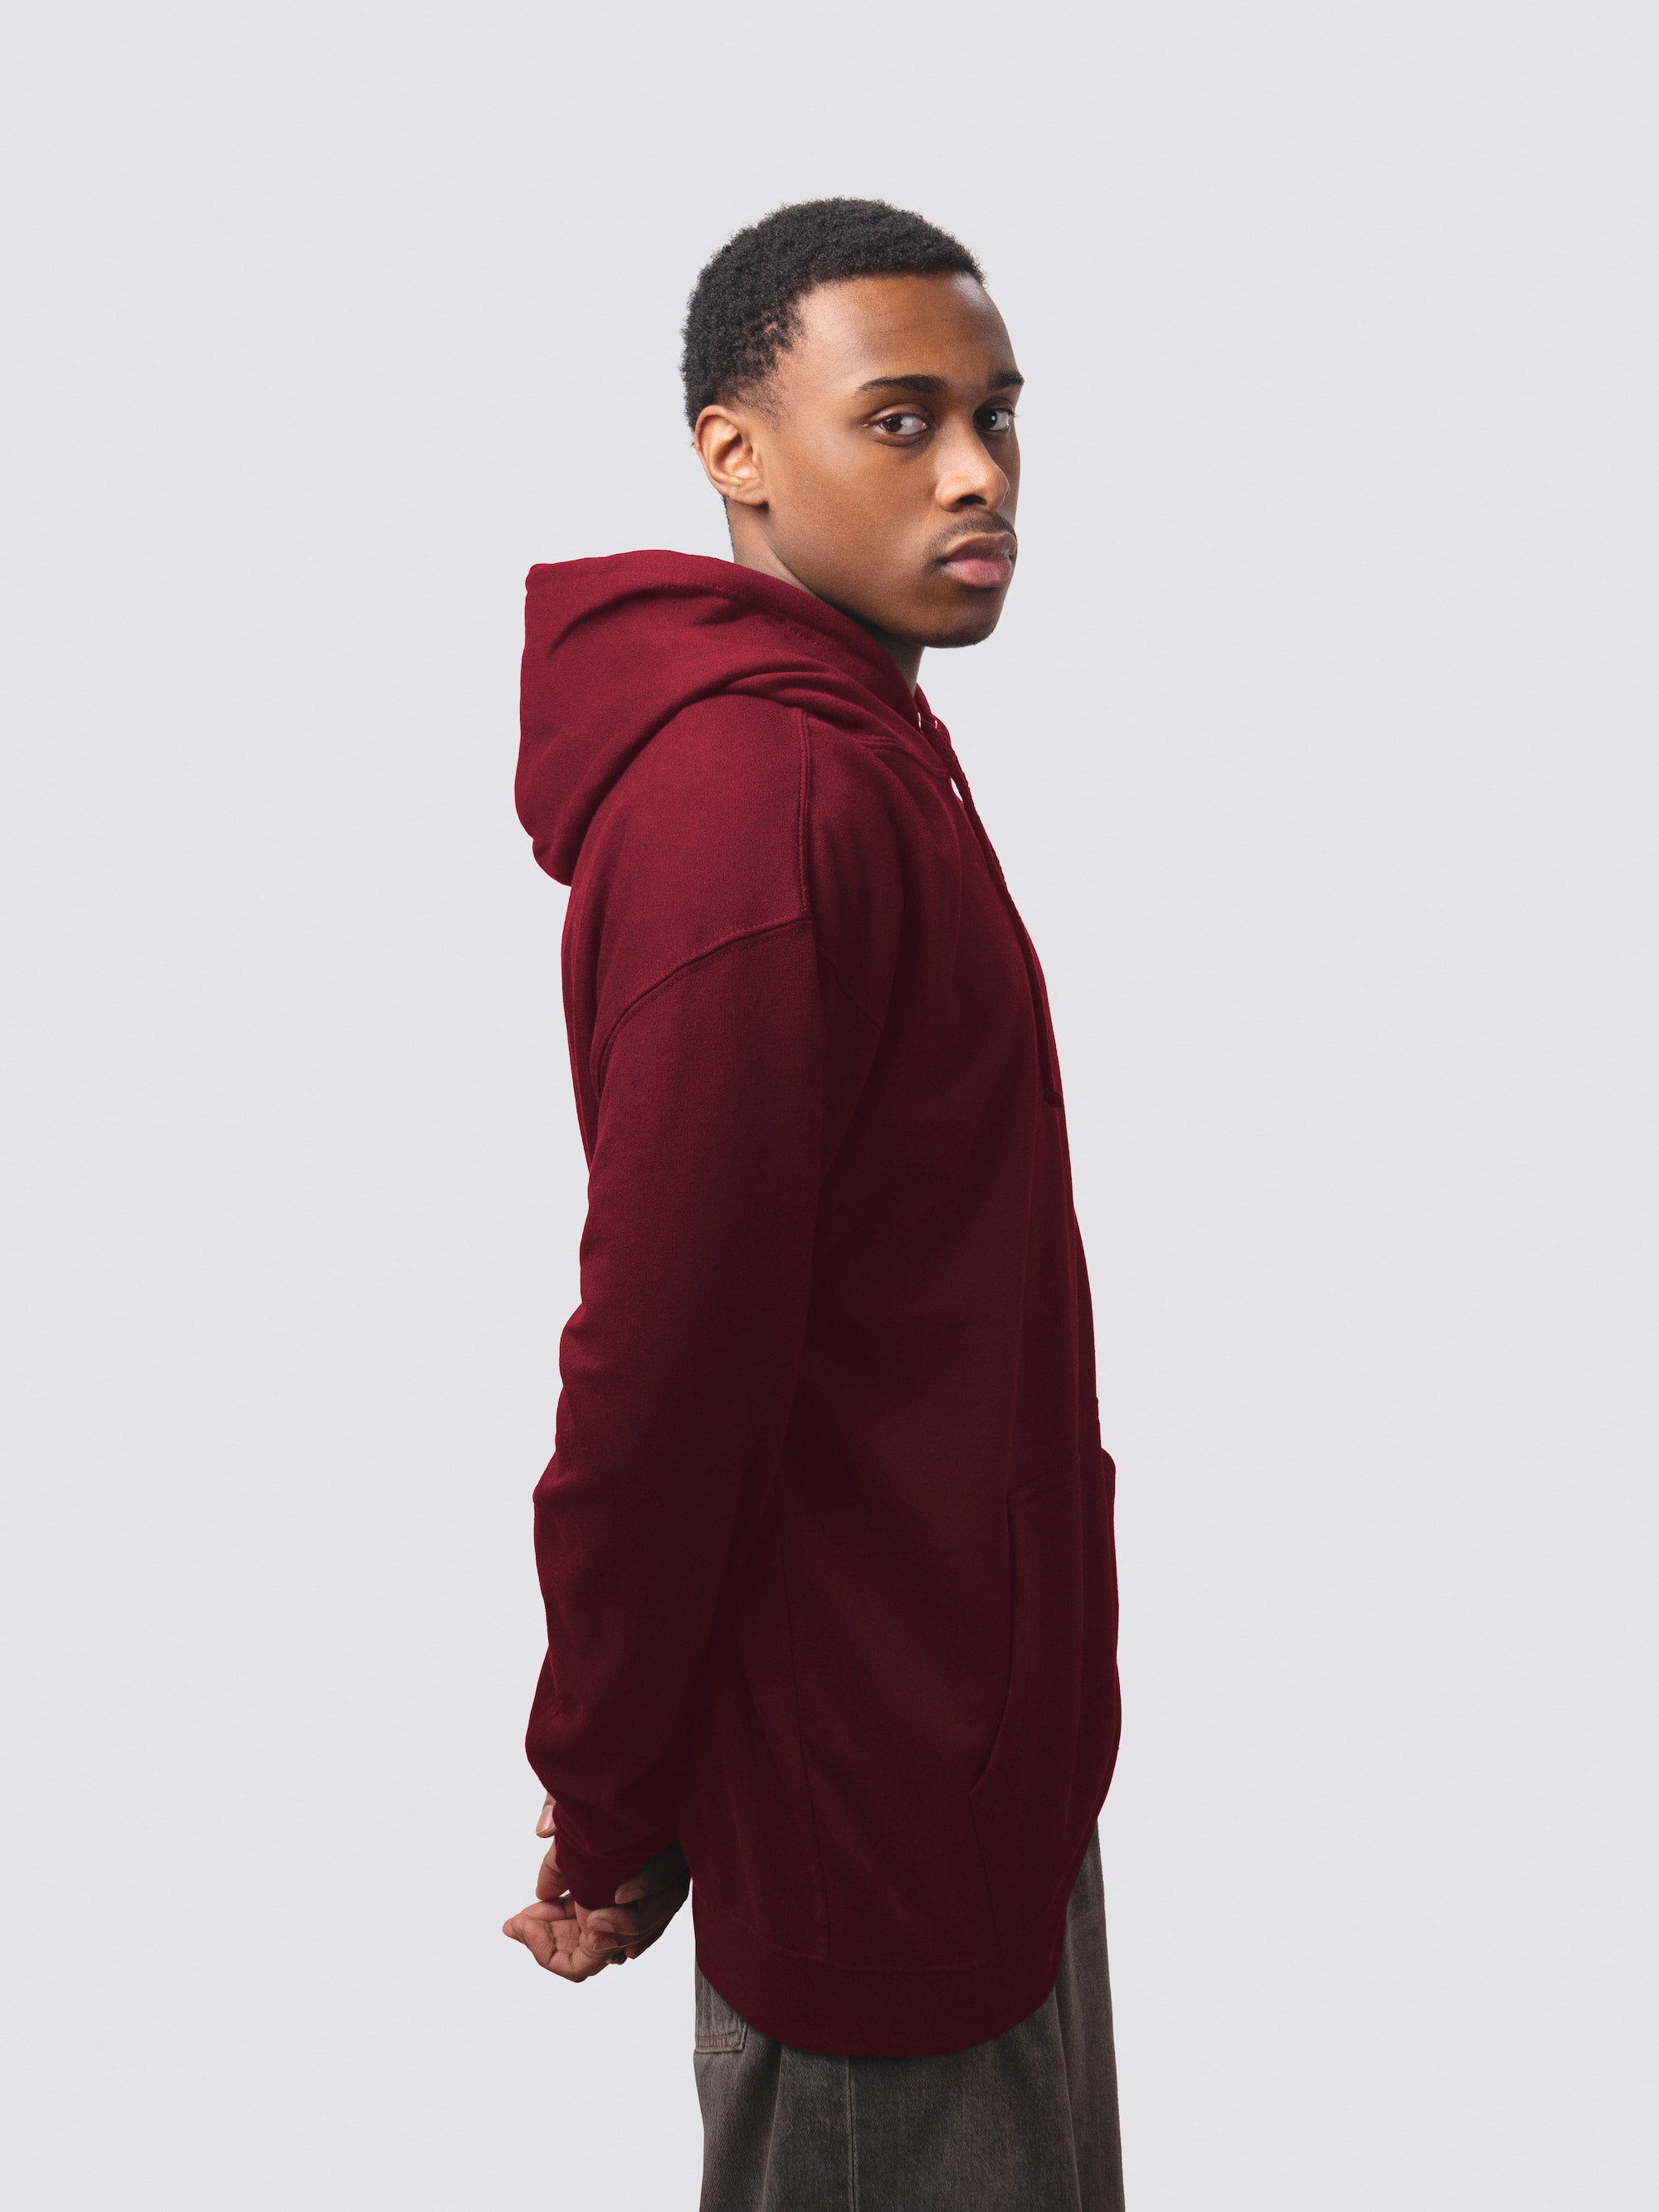 South College hoodie, made from burgundy cotton-faced fabric